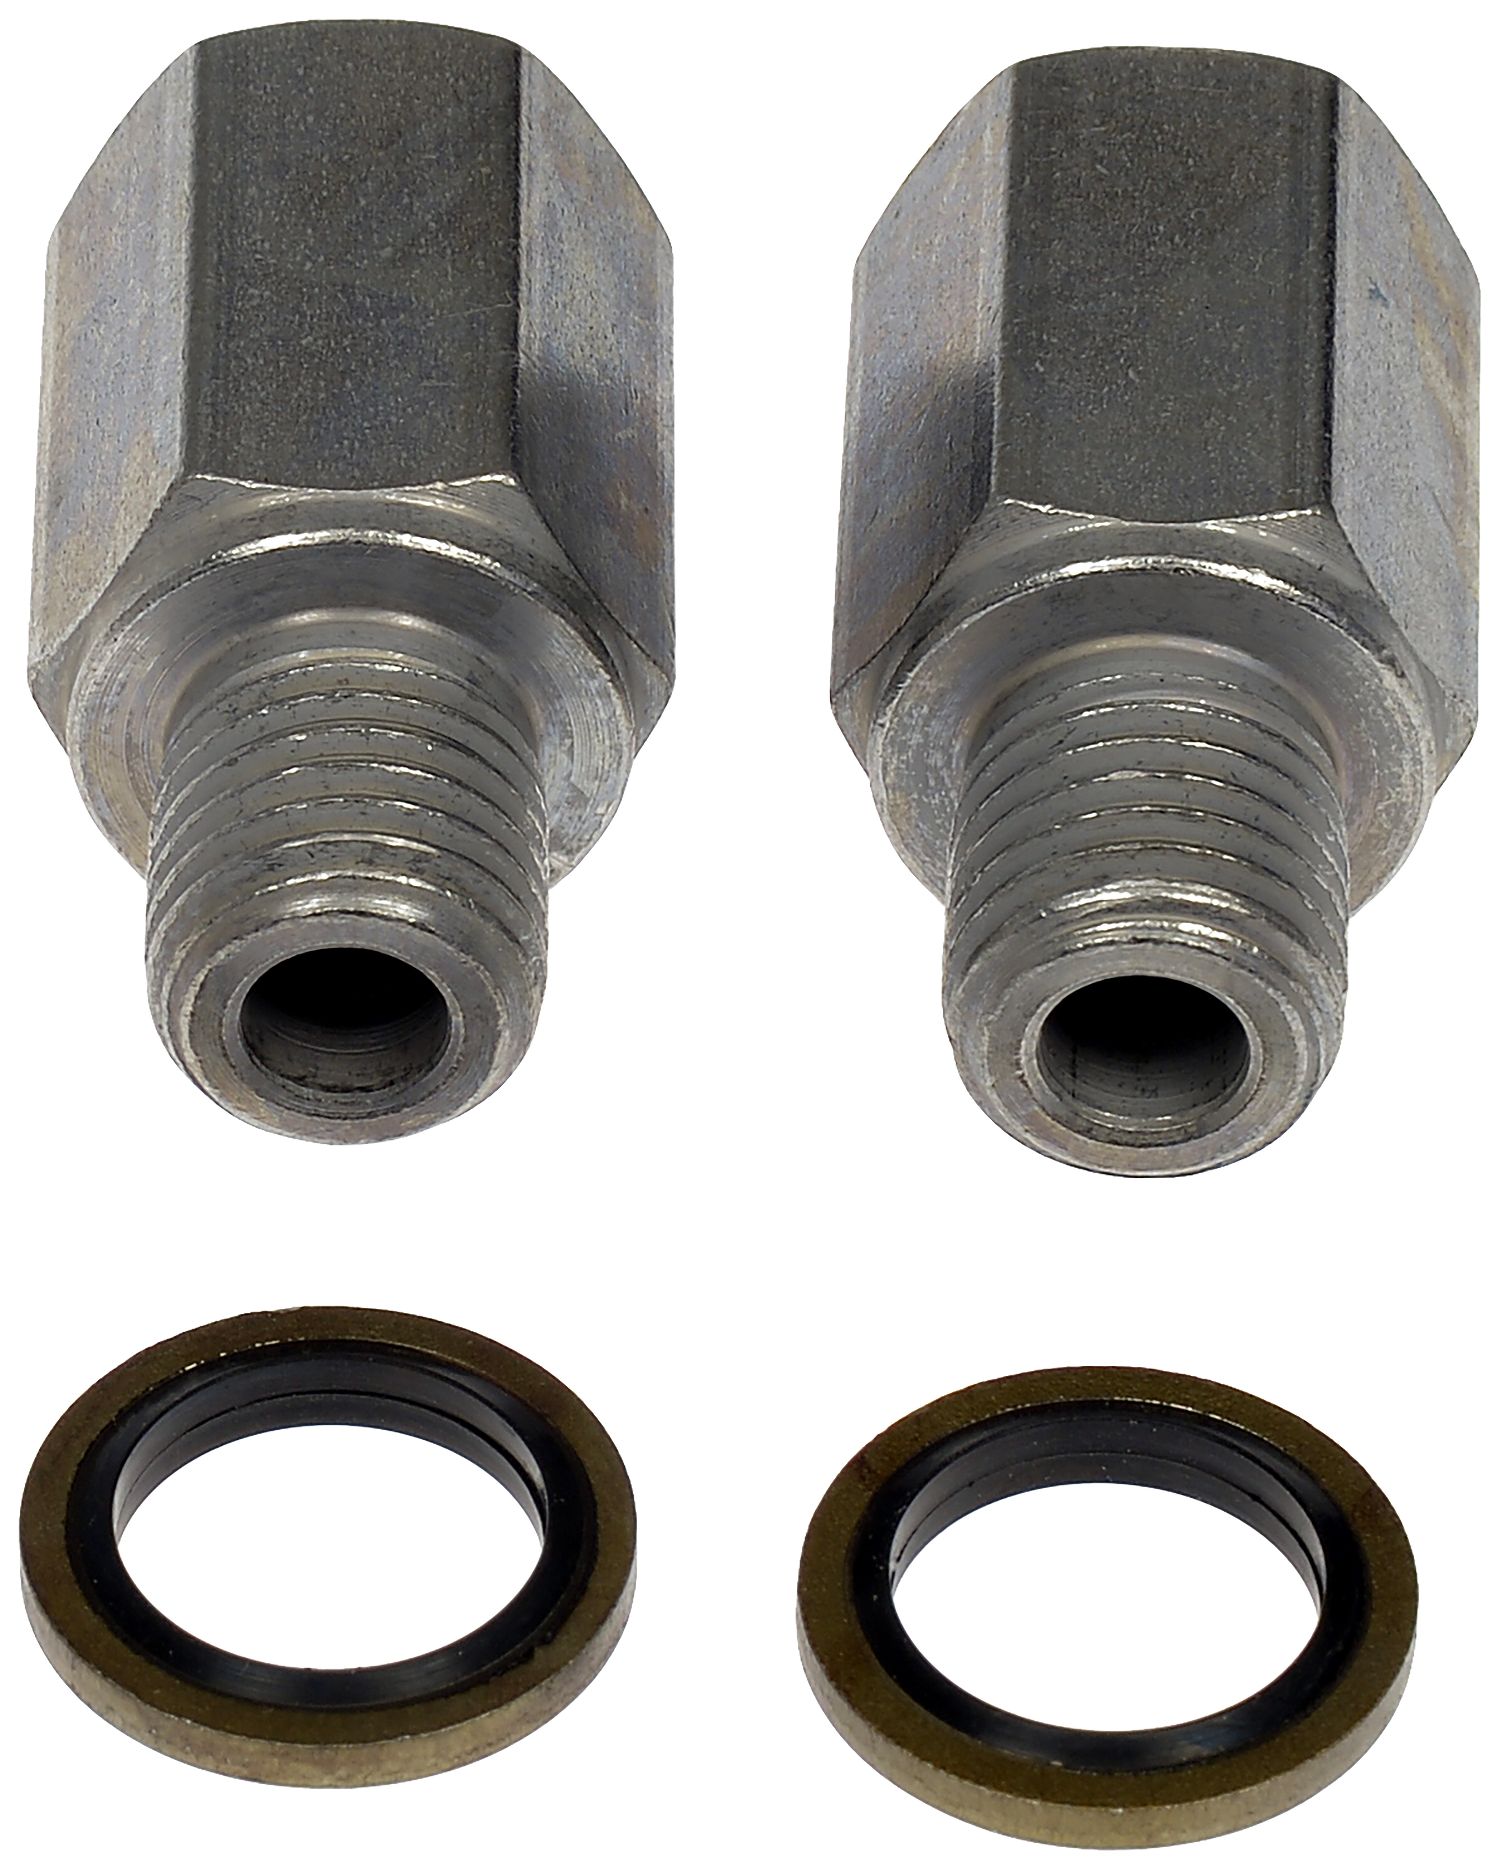 TURBO FEED HOSE CONNECTOR SET